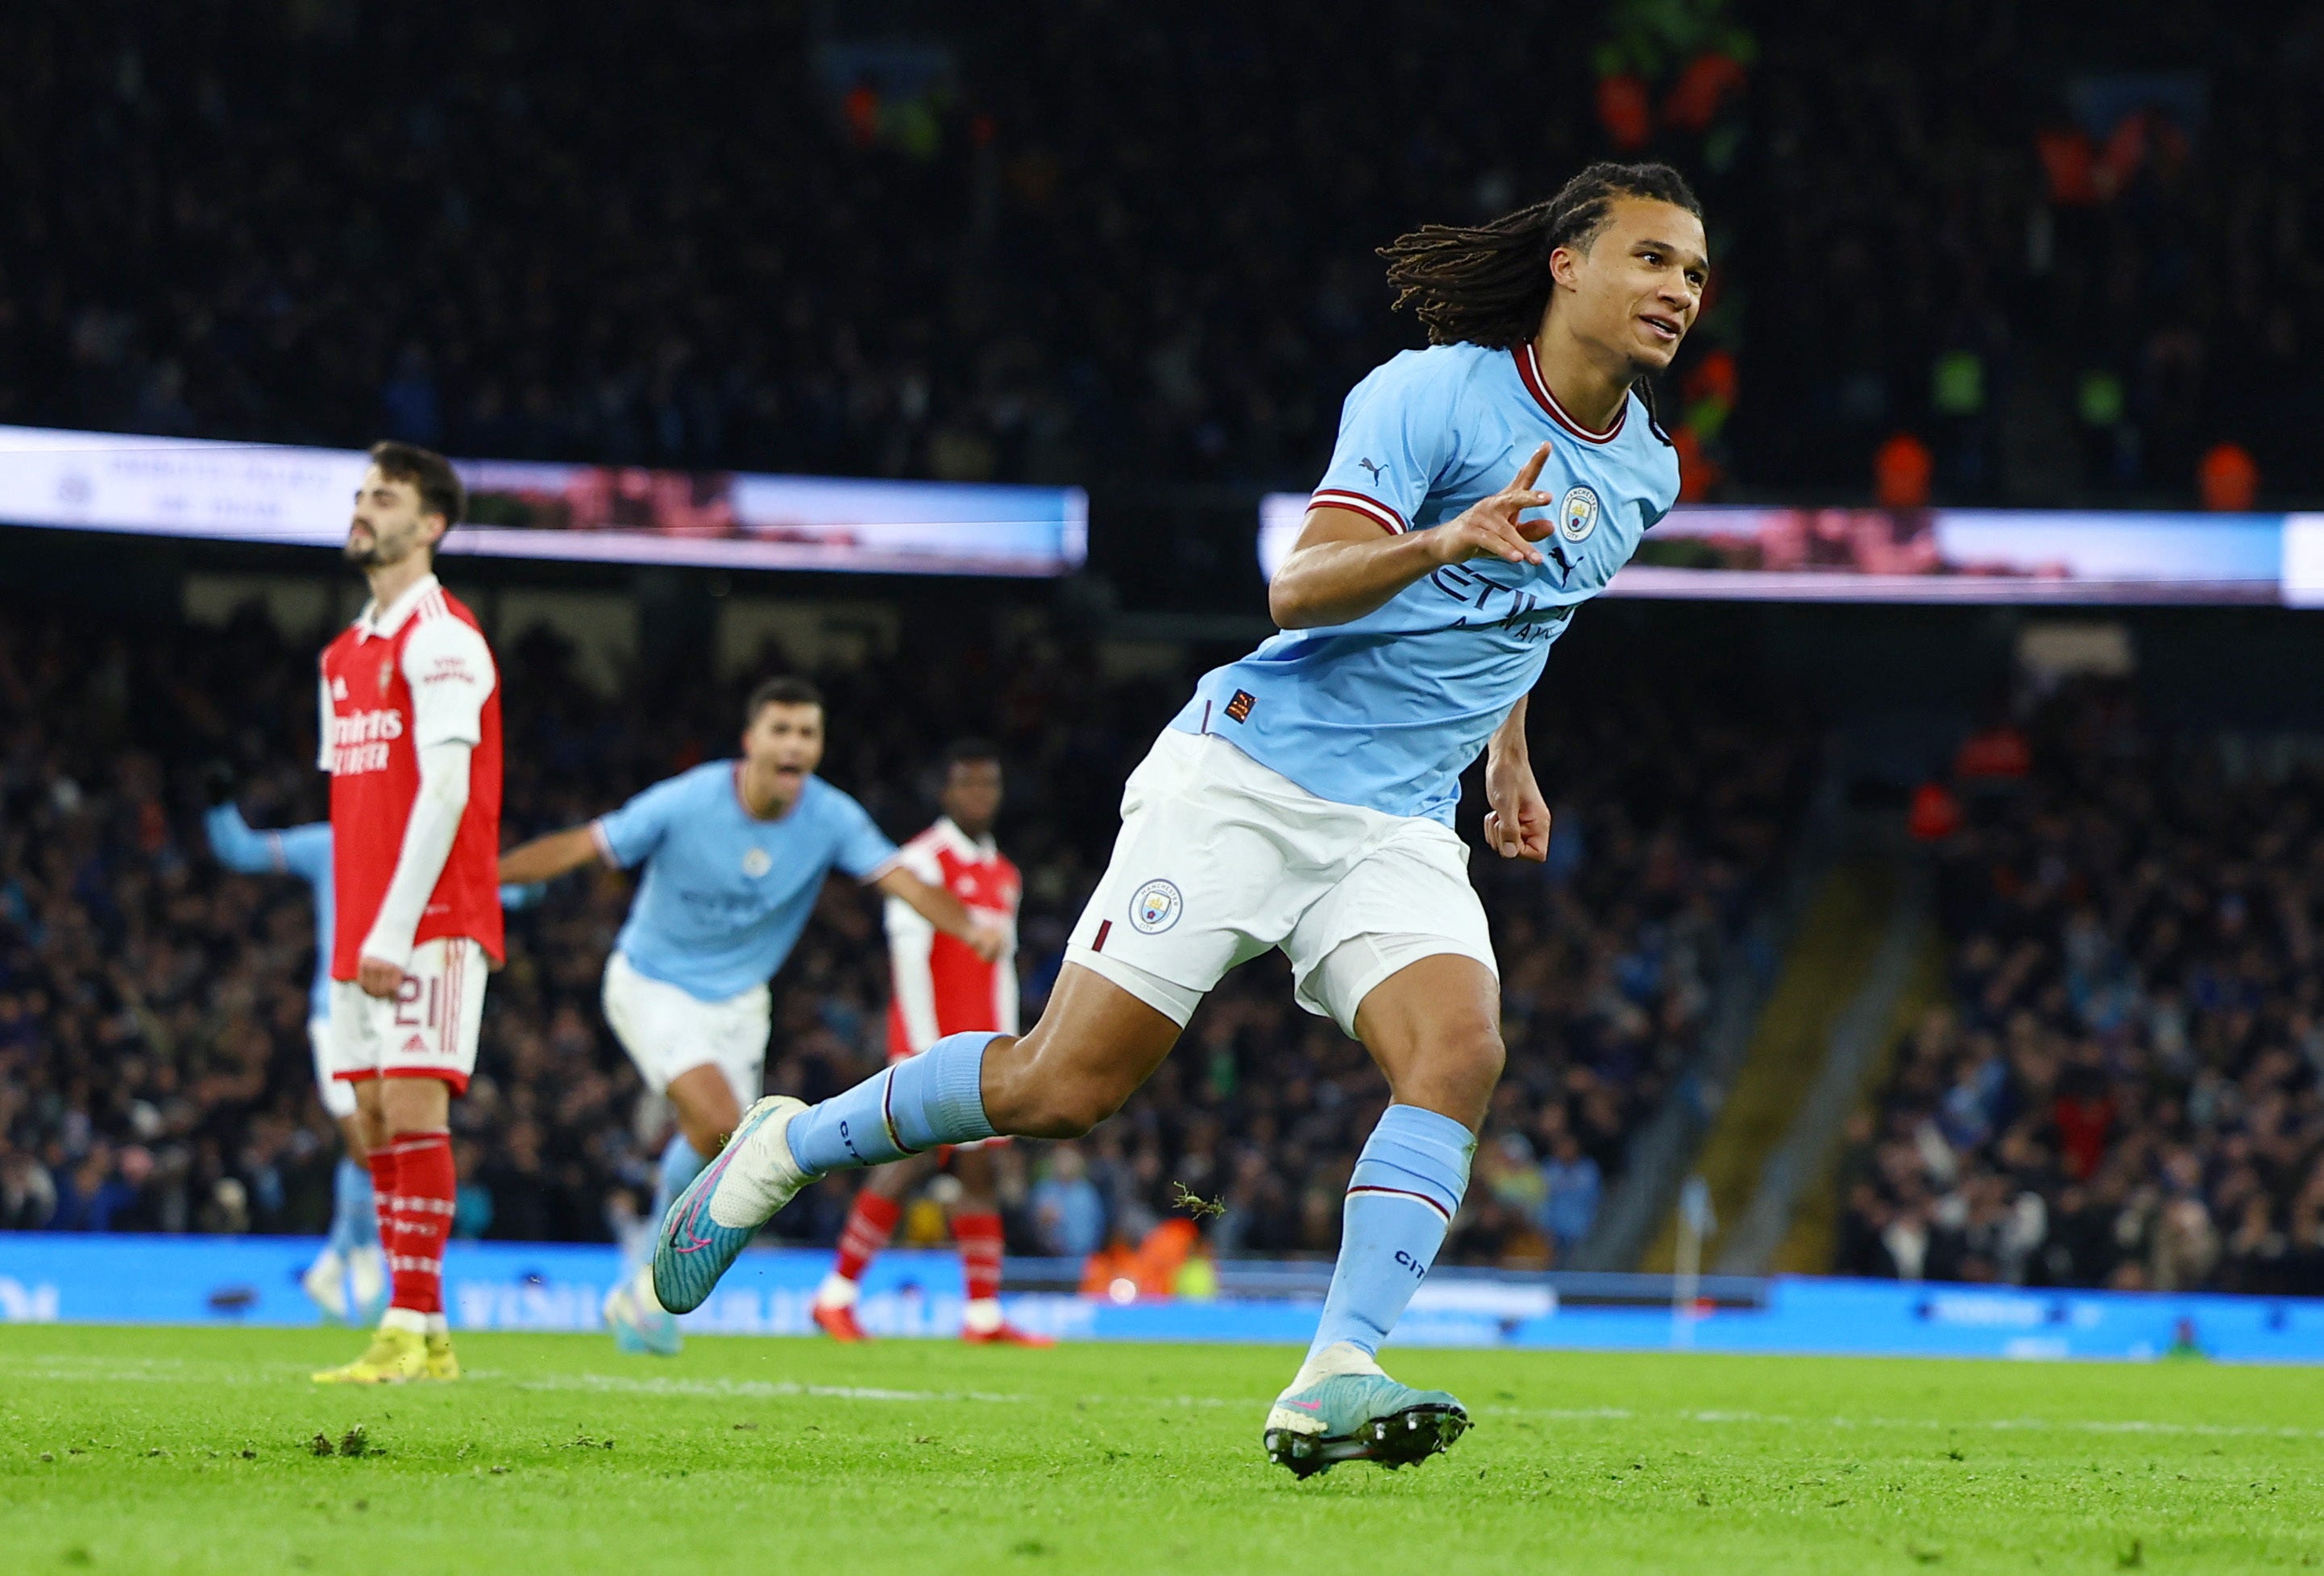 Man City vs Arsenal LIVE scoreResult and reaction from FA Cup fourth round clash